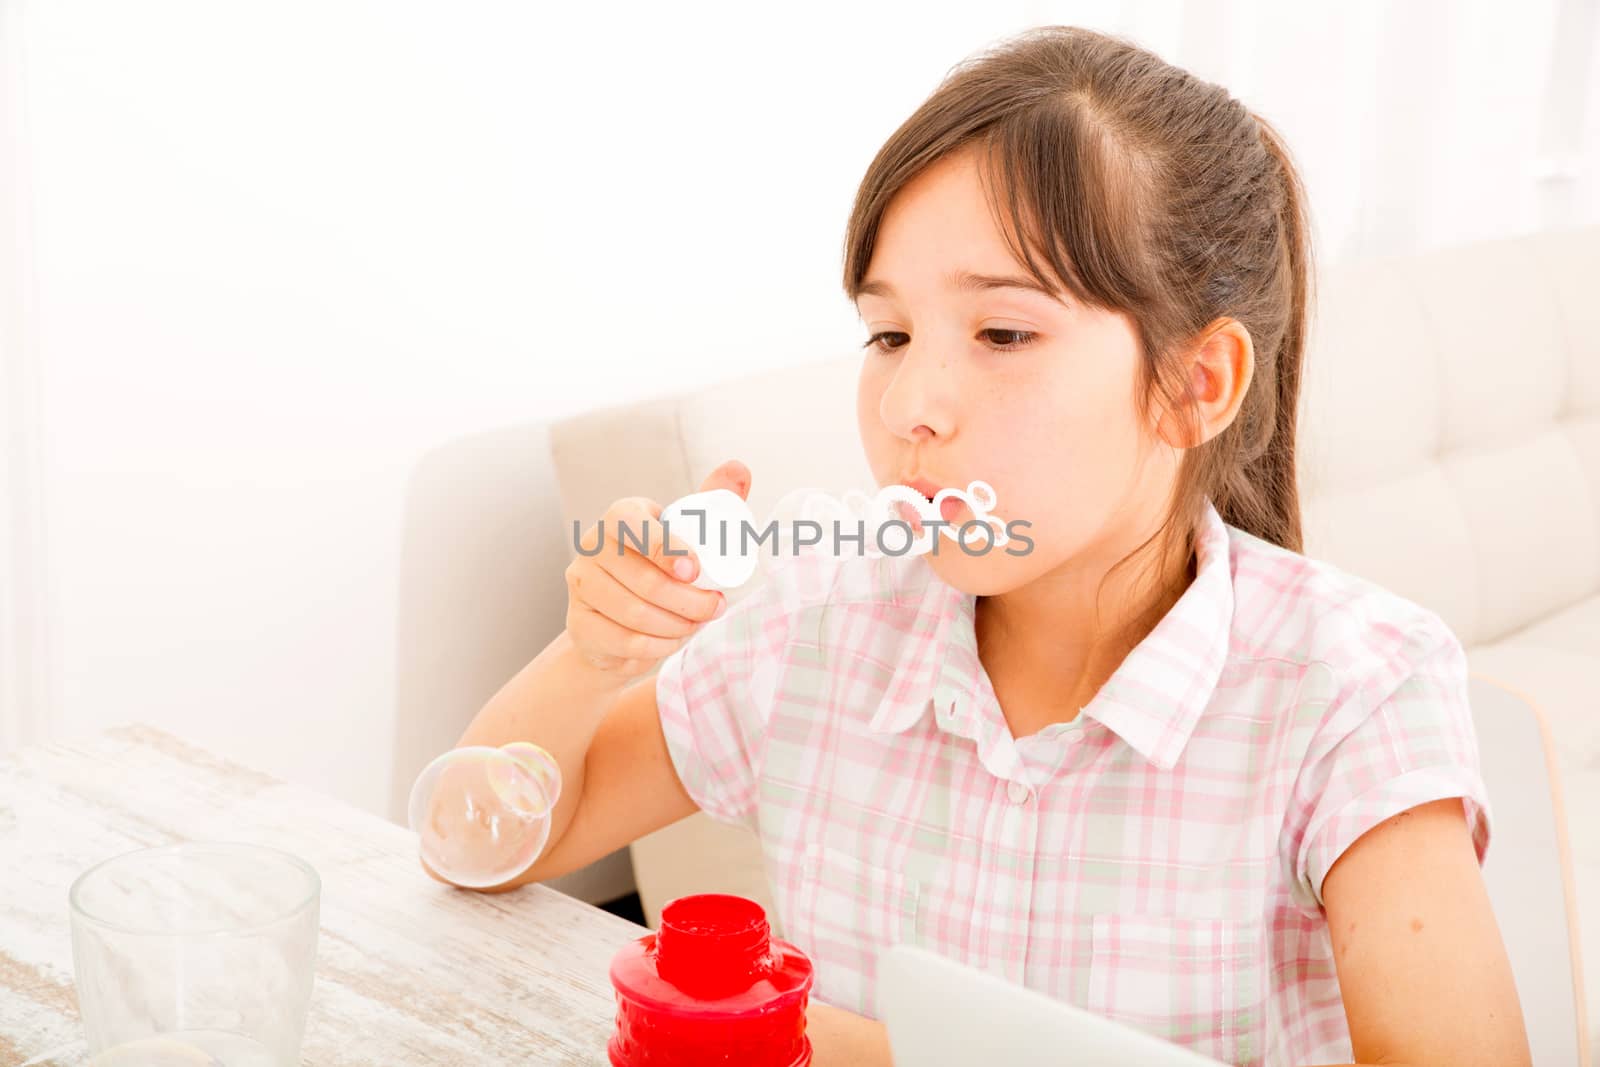 Portrait of girl blowing bubbles at home at the table.
